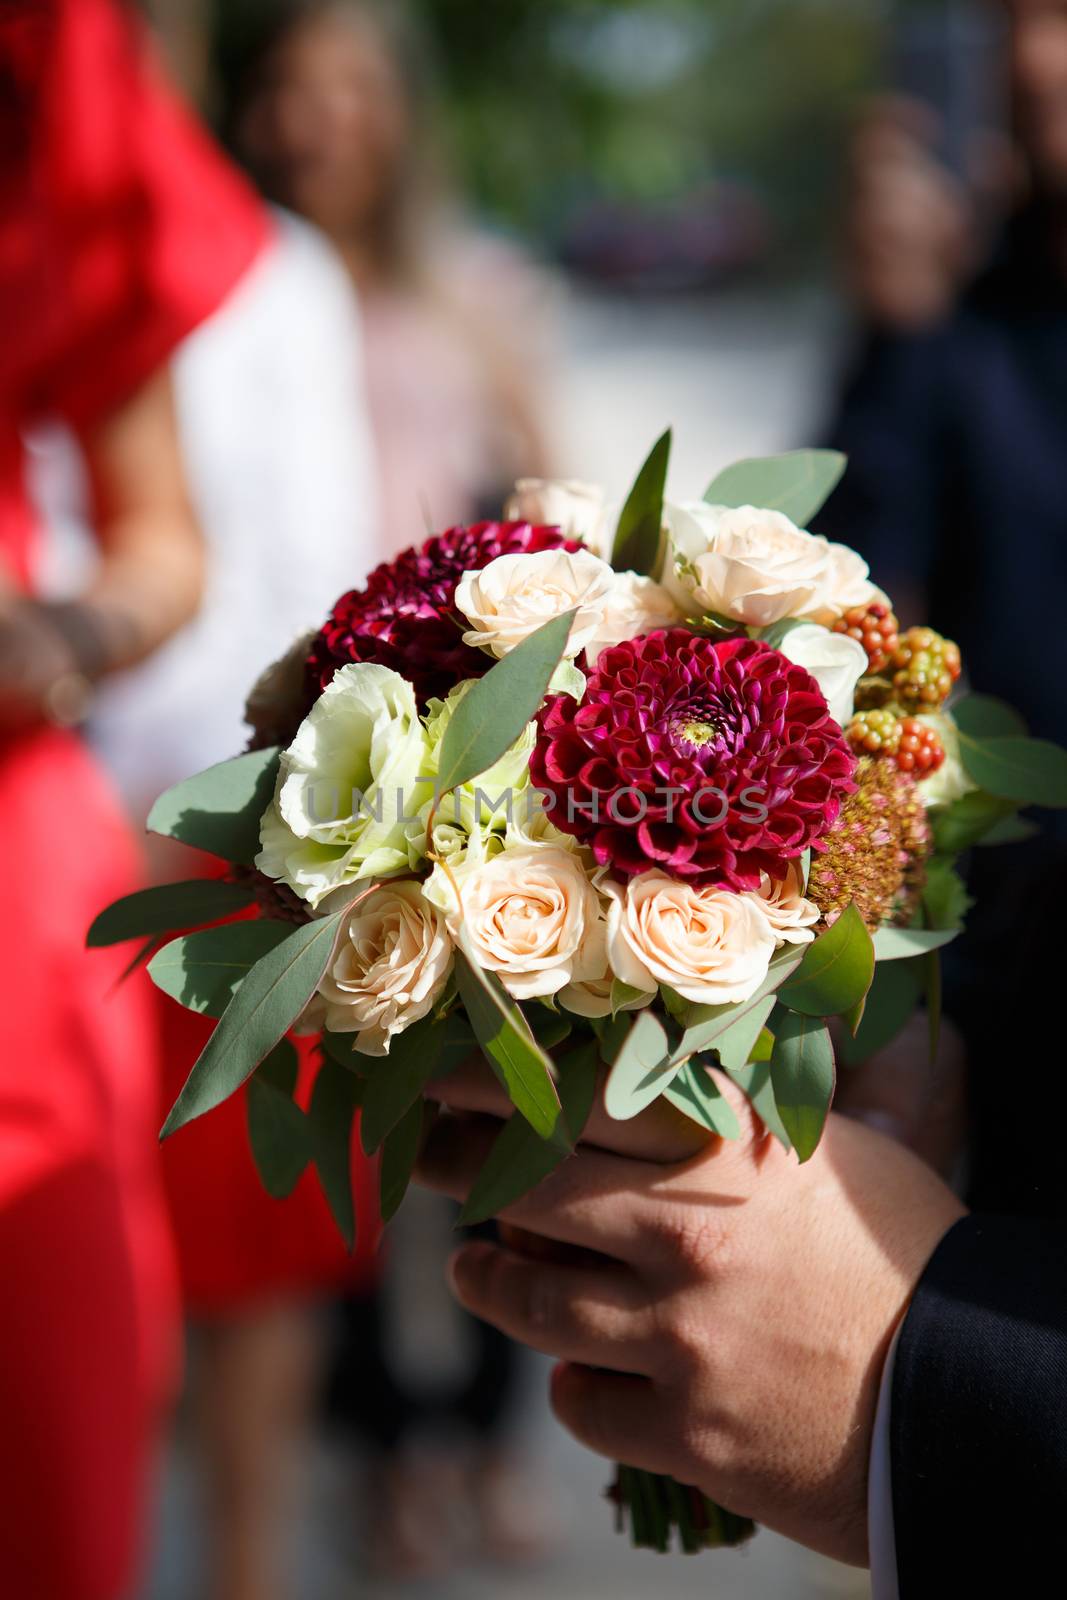 The groom brings a bouquet for the bride. Groom with bridal bouquet of roses, berries and dahlias